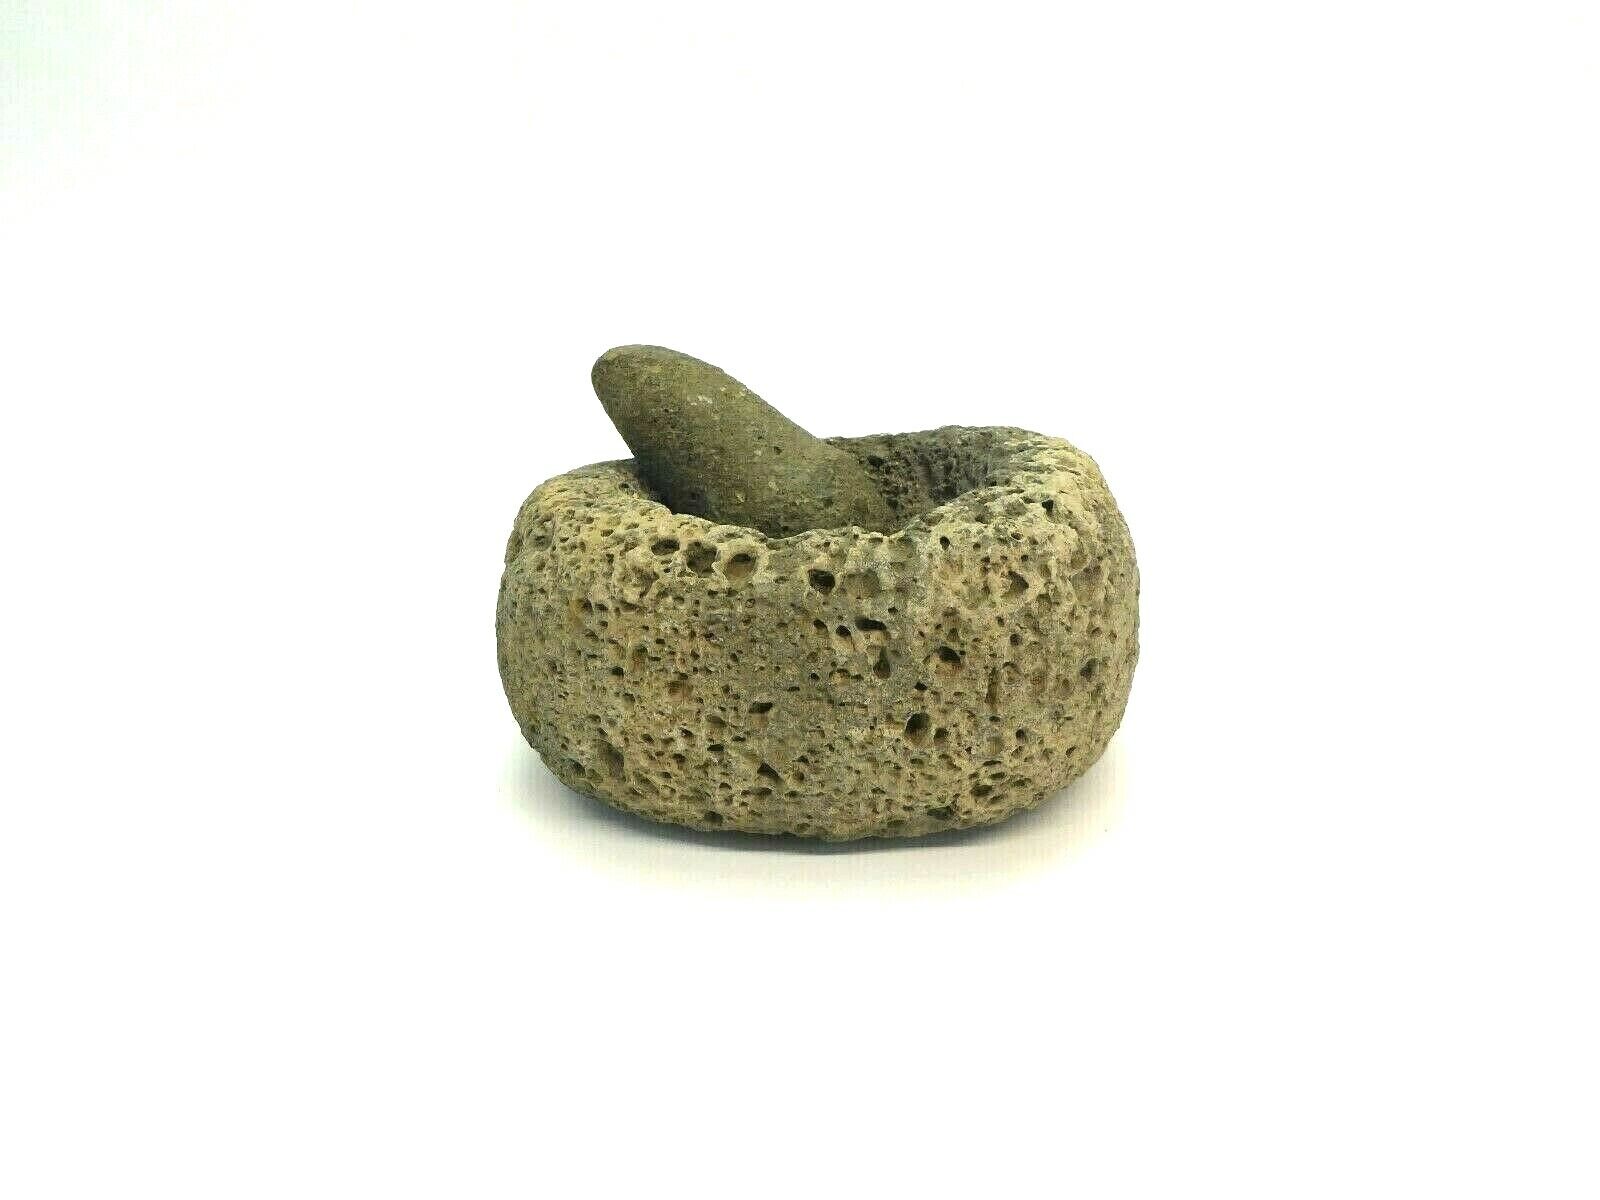 New Mexico Mortar and Pestle